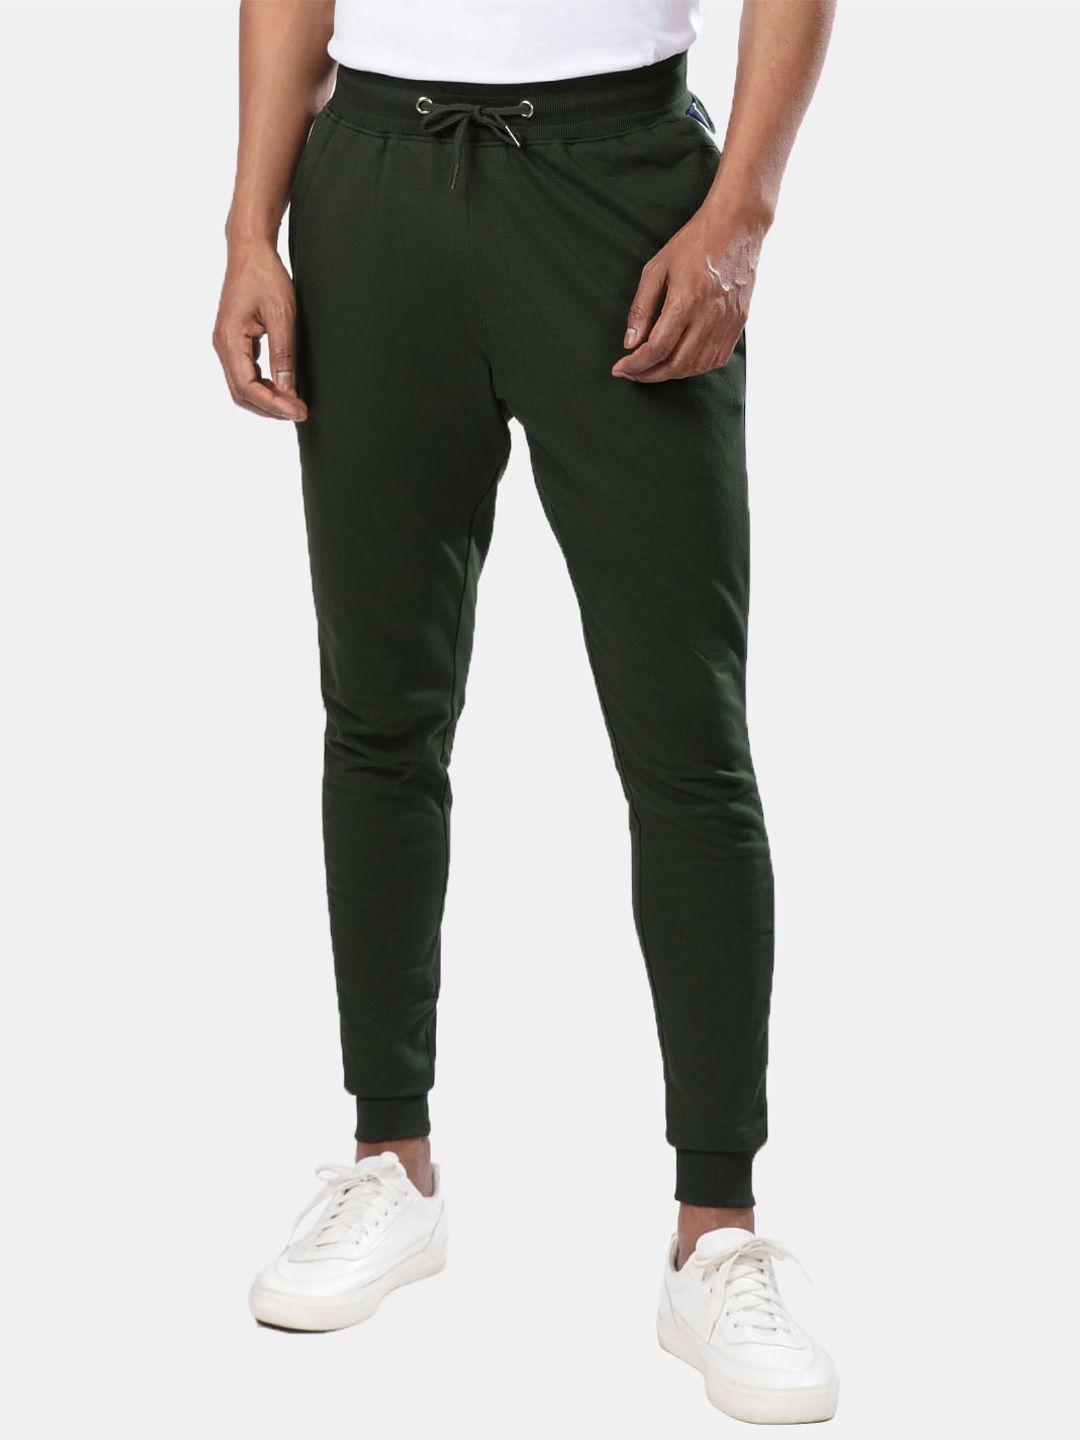 the souled store men olive-green solid cotton joggers